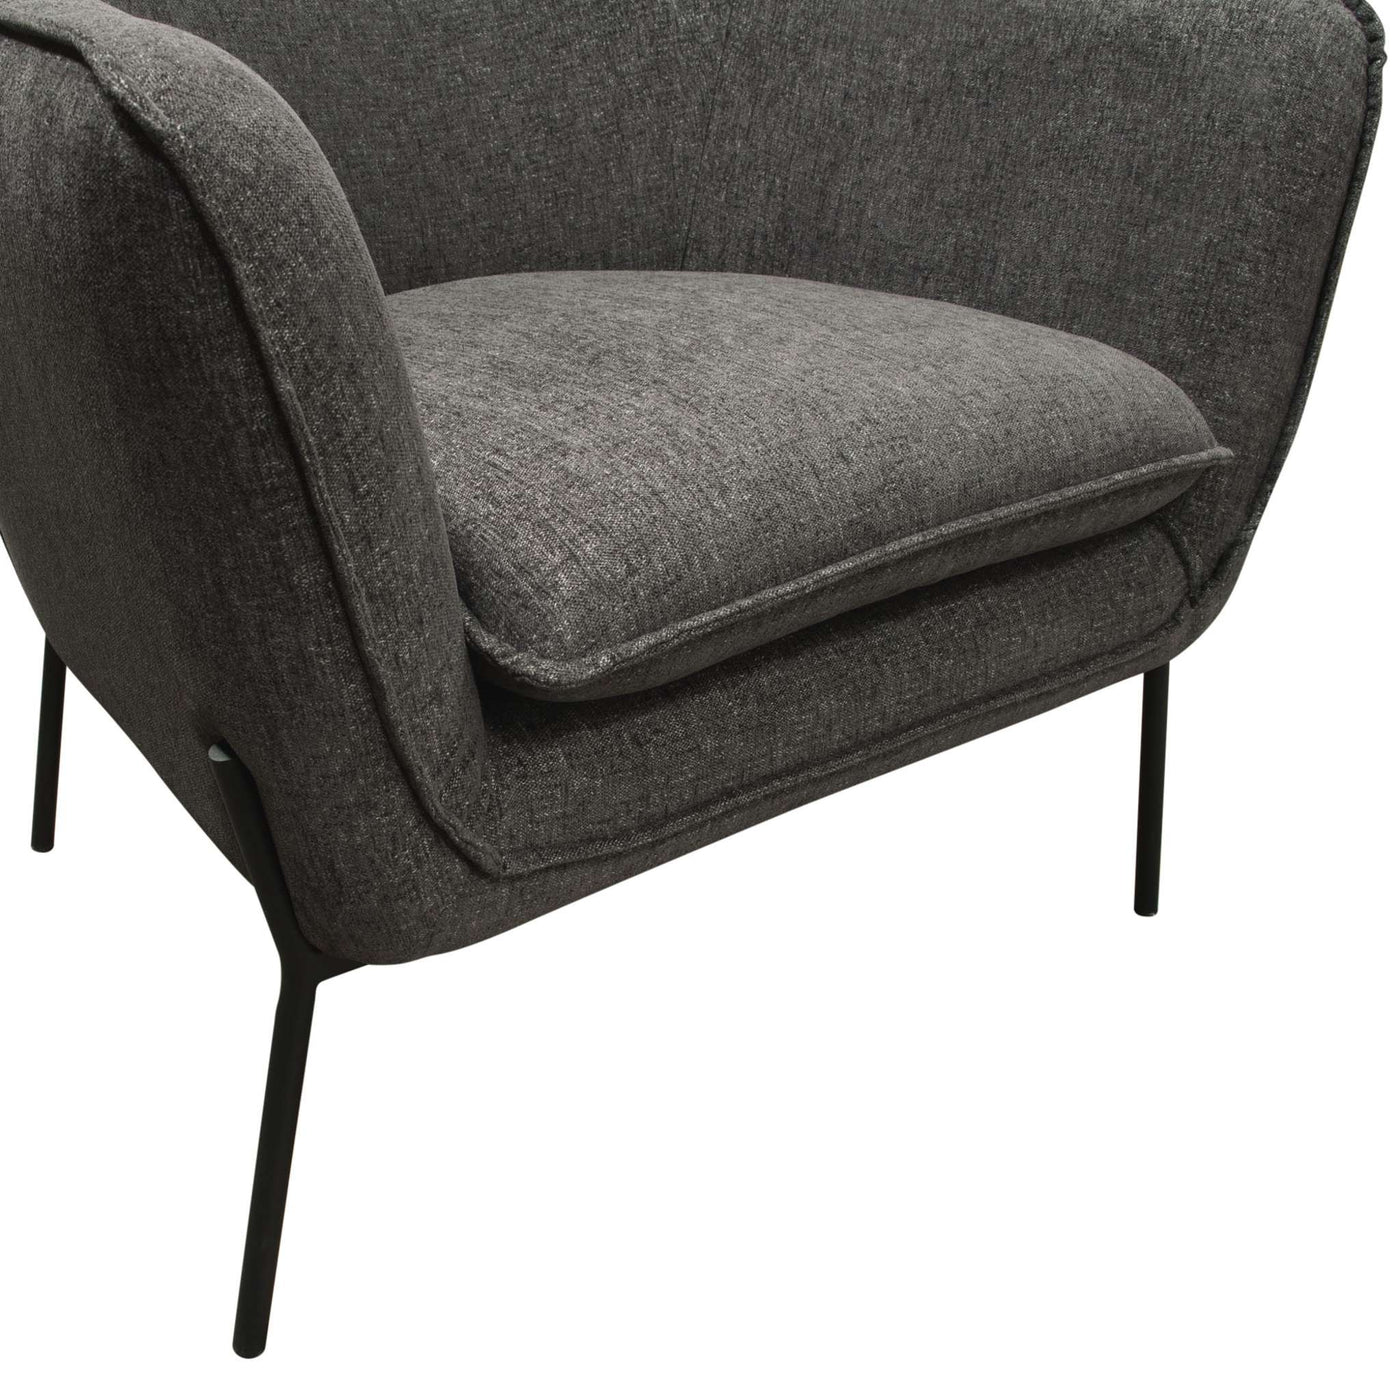 Status Accent Chair in with Metal Leg by Diamond Sofa